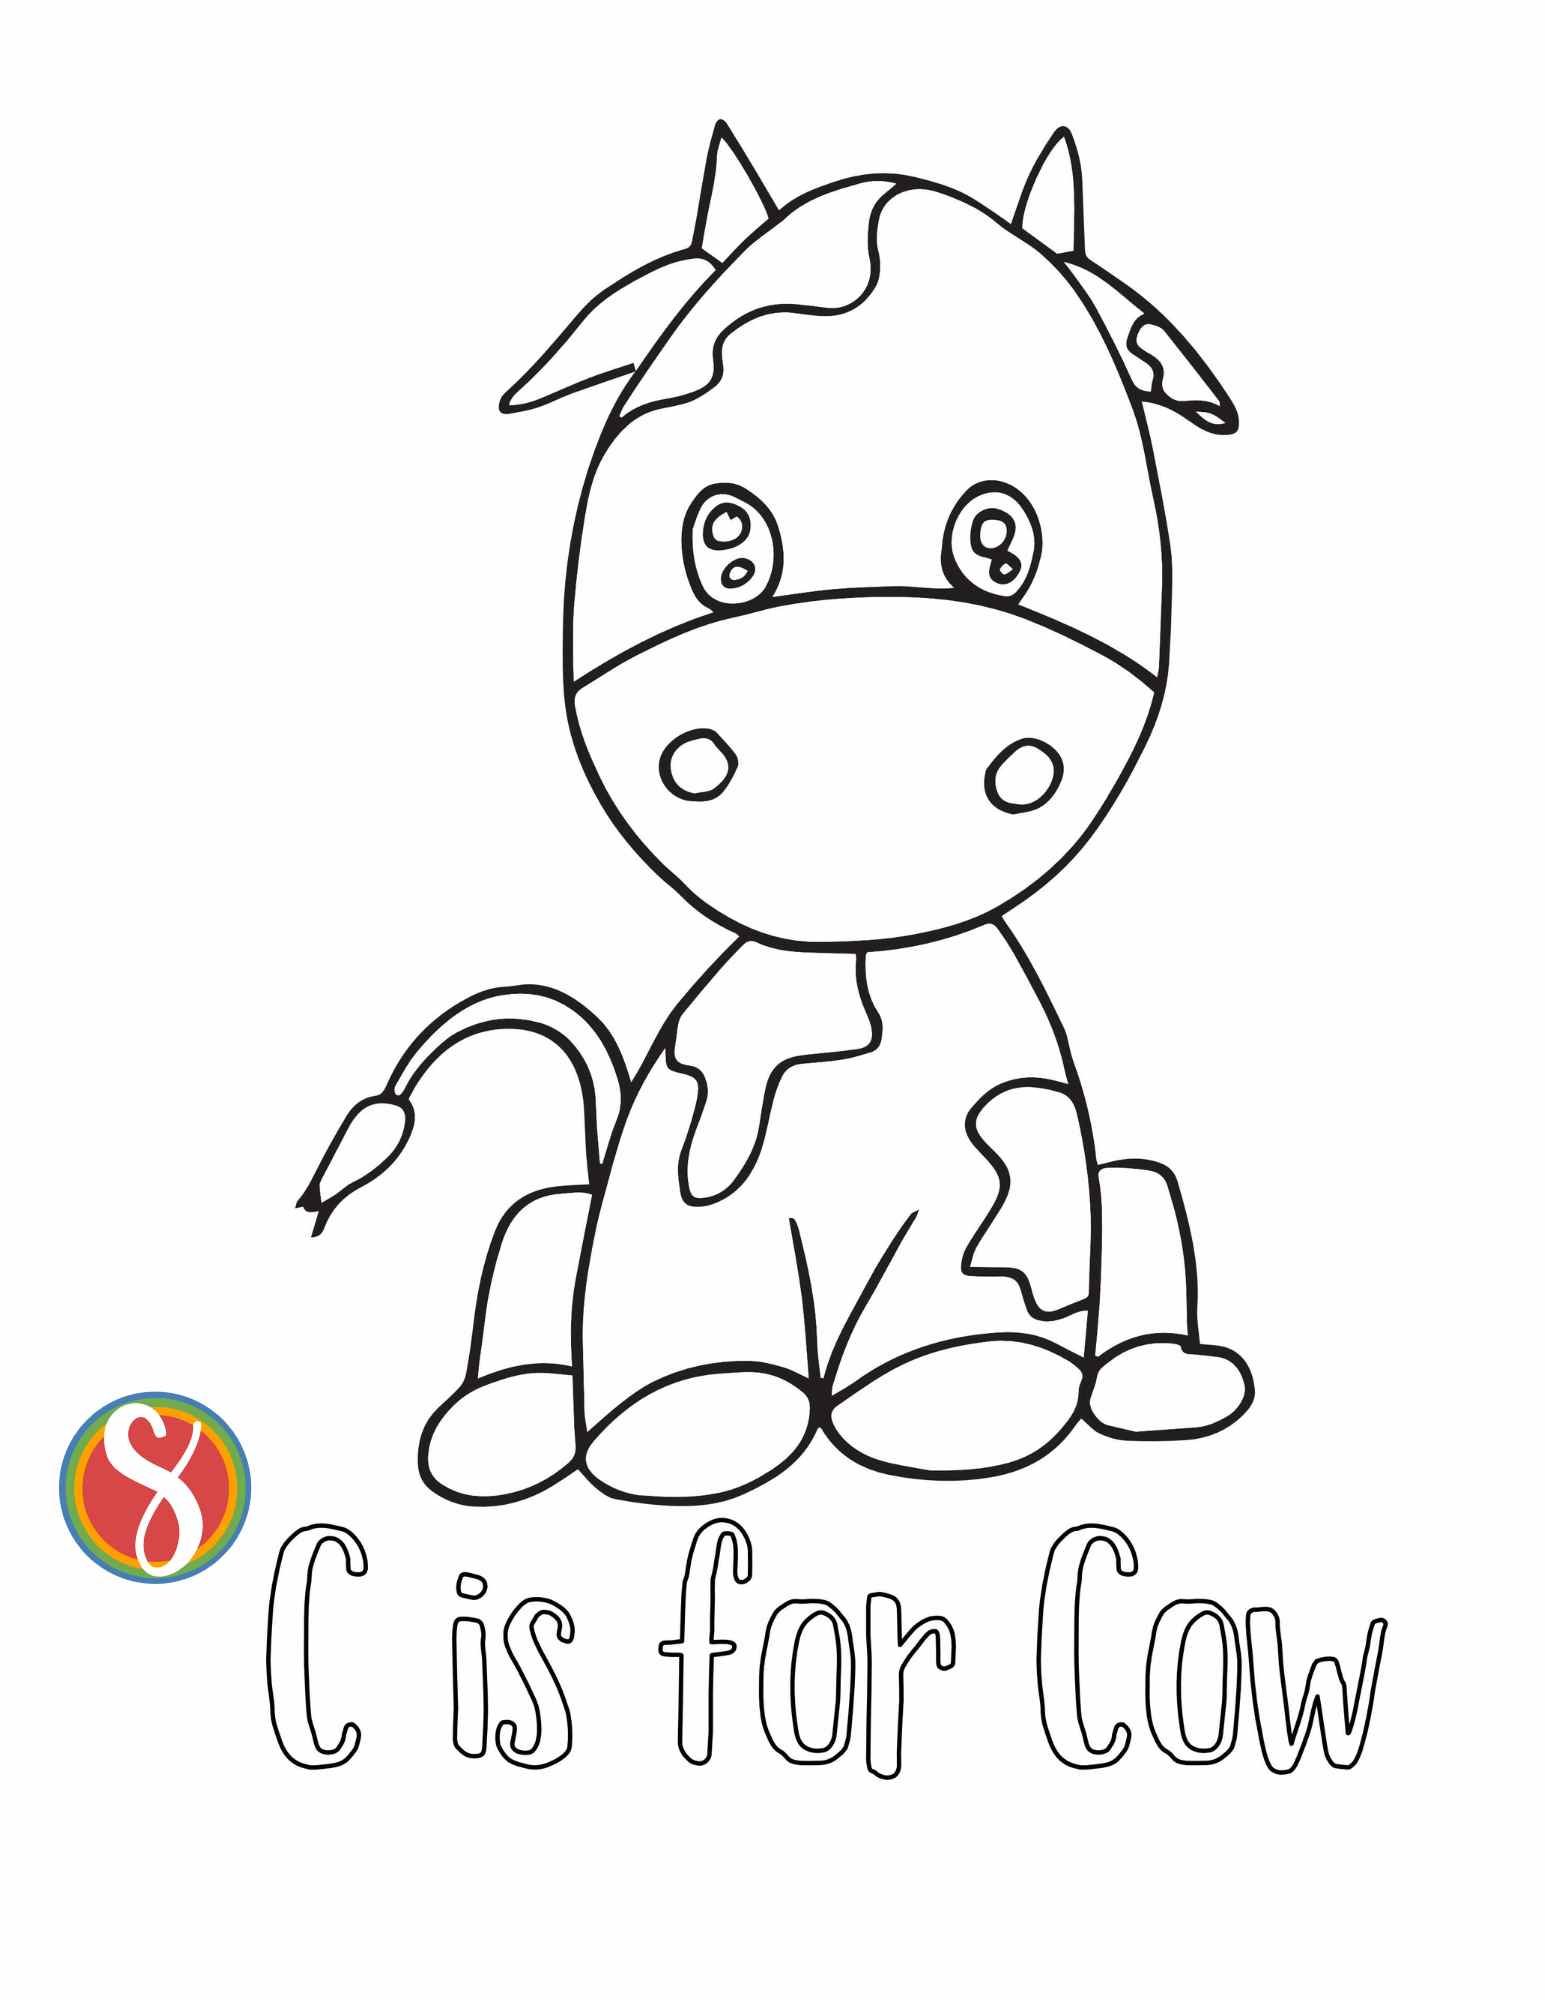 A simple baby cow outline with spots and horns, black and white for coloring, with the colorable words "c is for cow" underneath